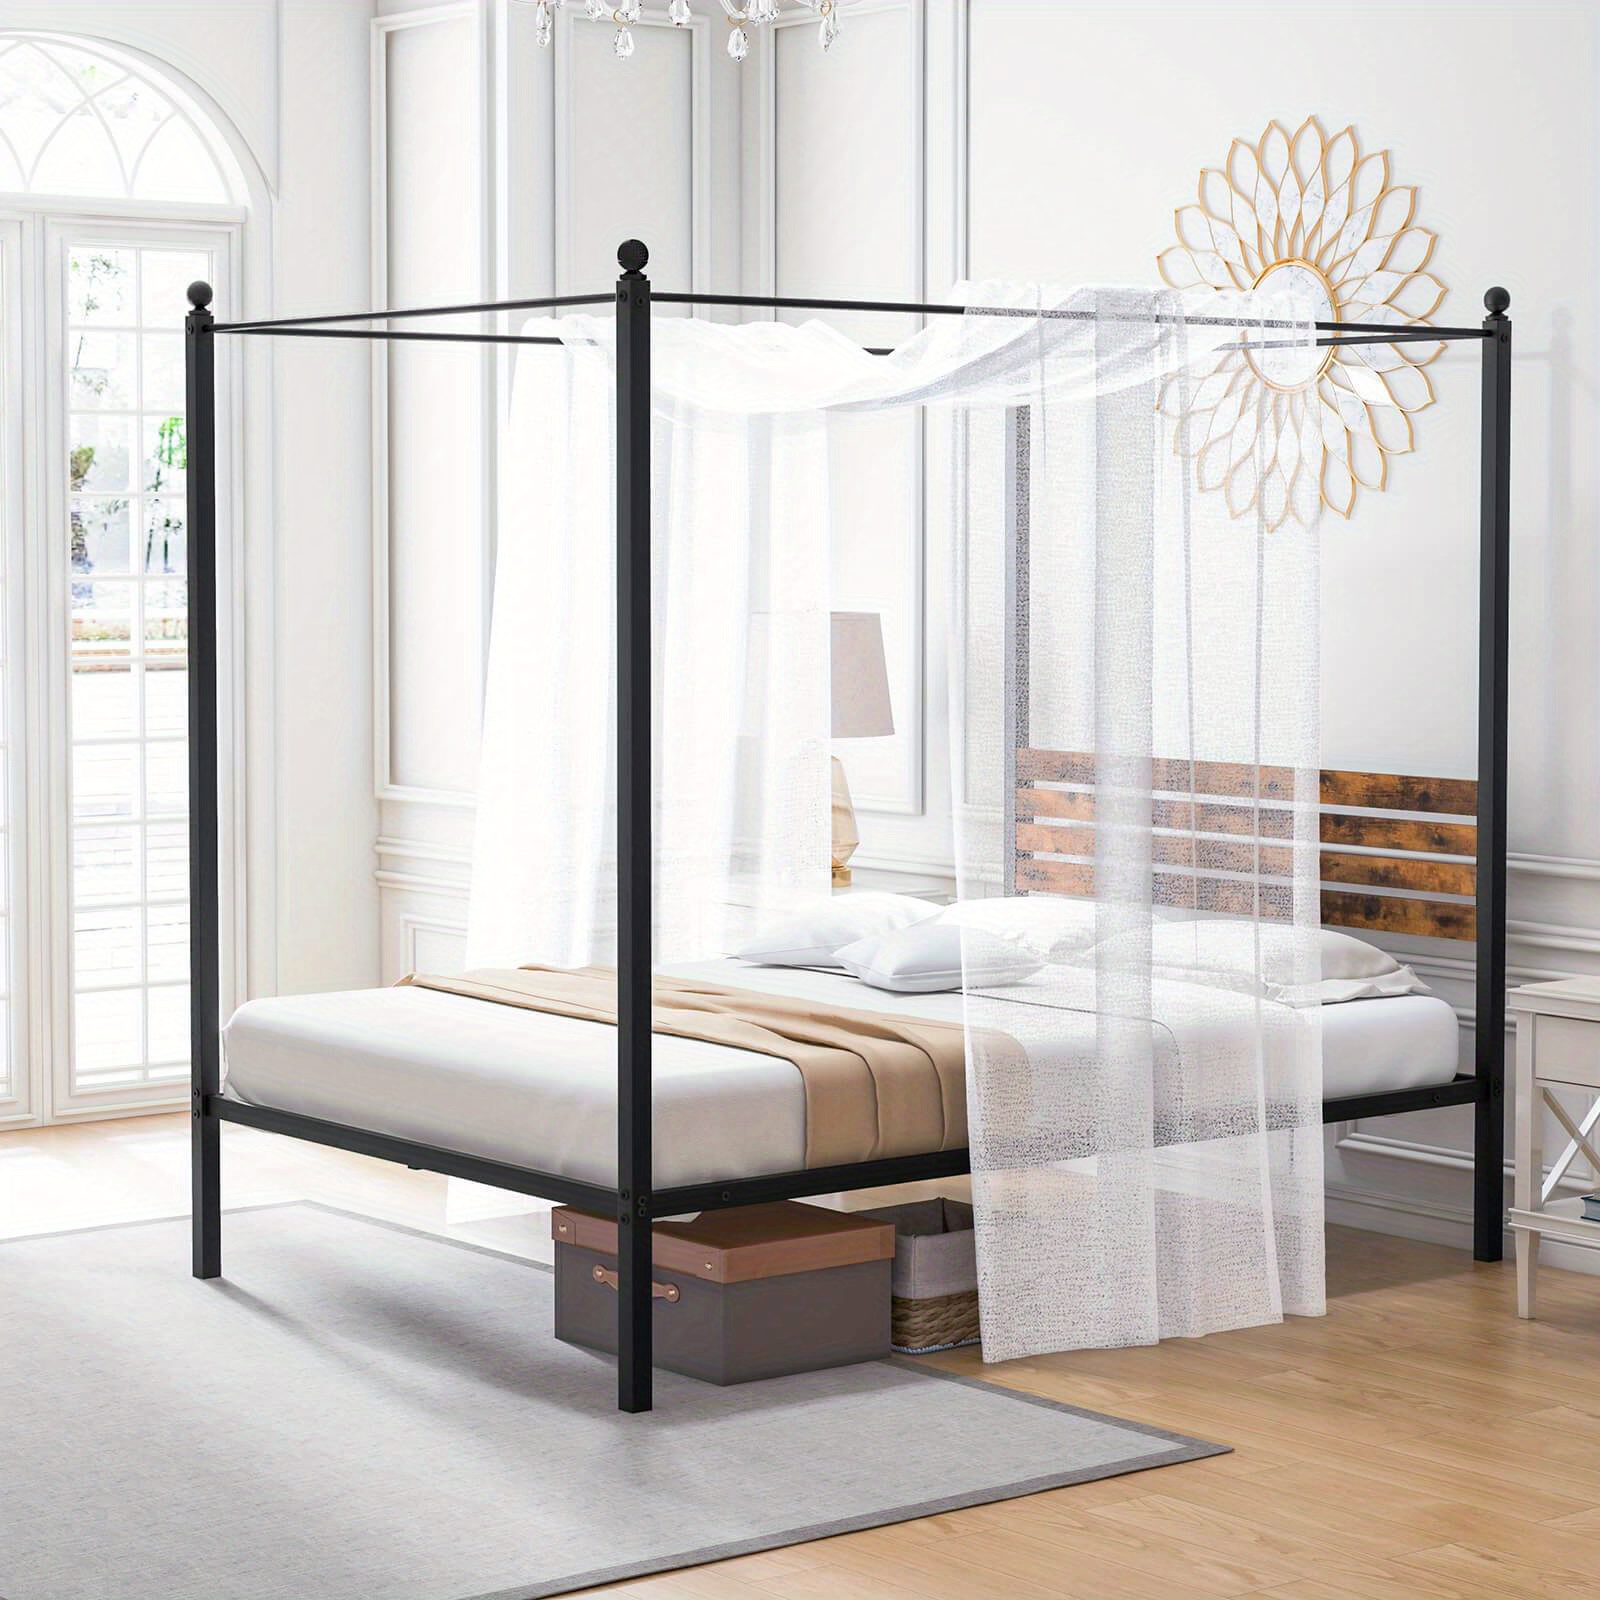 

Costway Full Size Canopy Bed Frame 4-poster Platform Bed Frame W/ Industrial Headboard